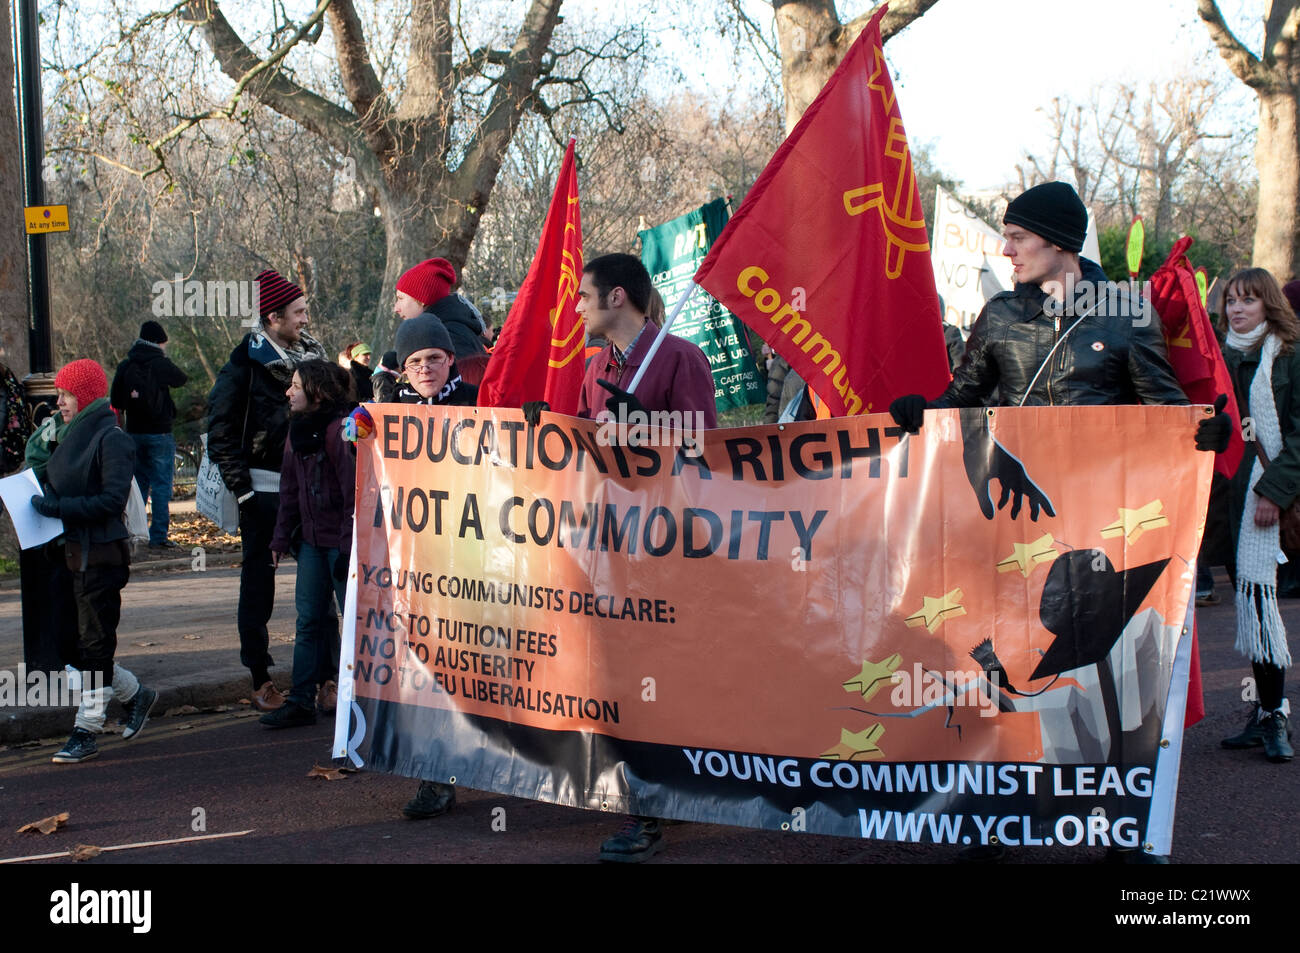 Young Communist League at Student protest against University fees, London, 09/12/2010 Stock Photo